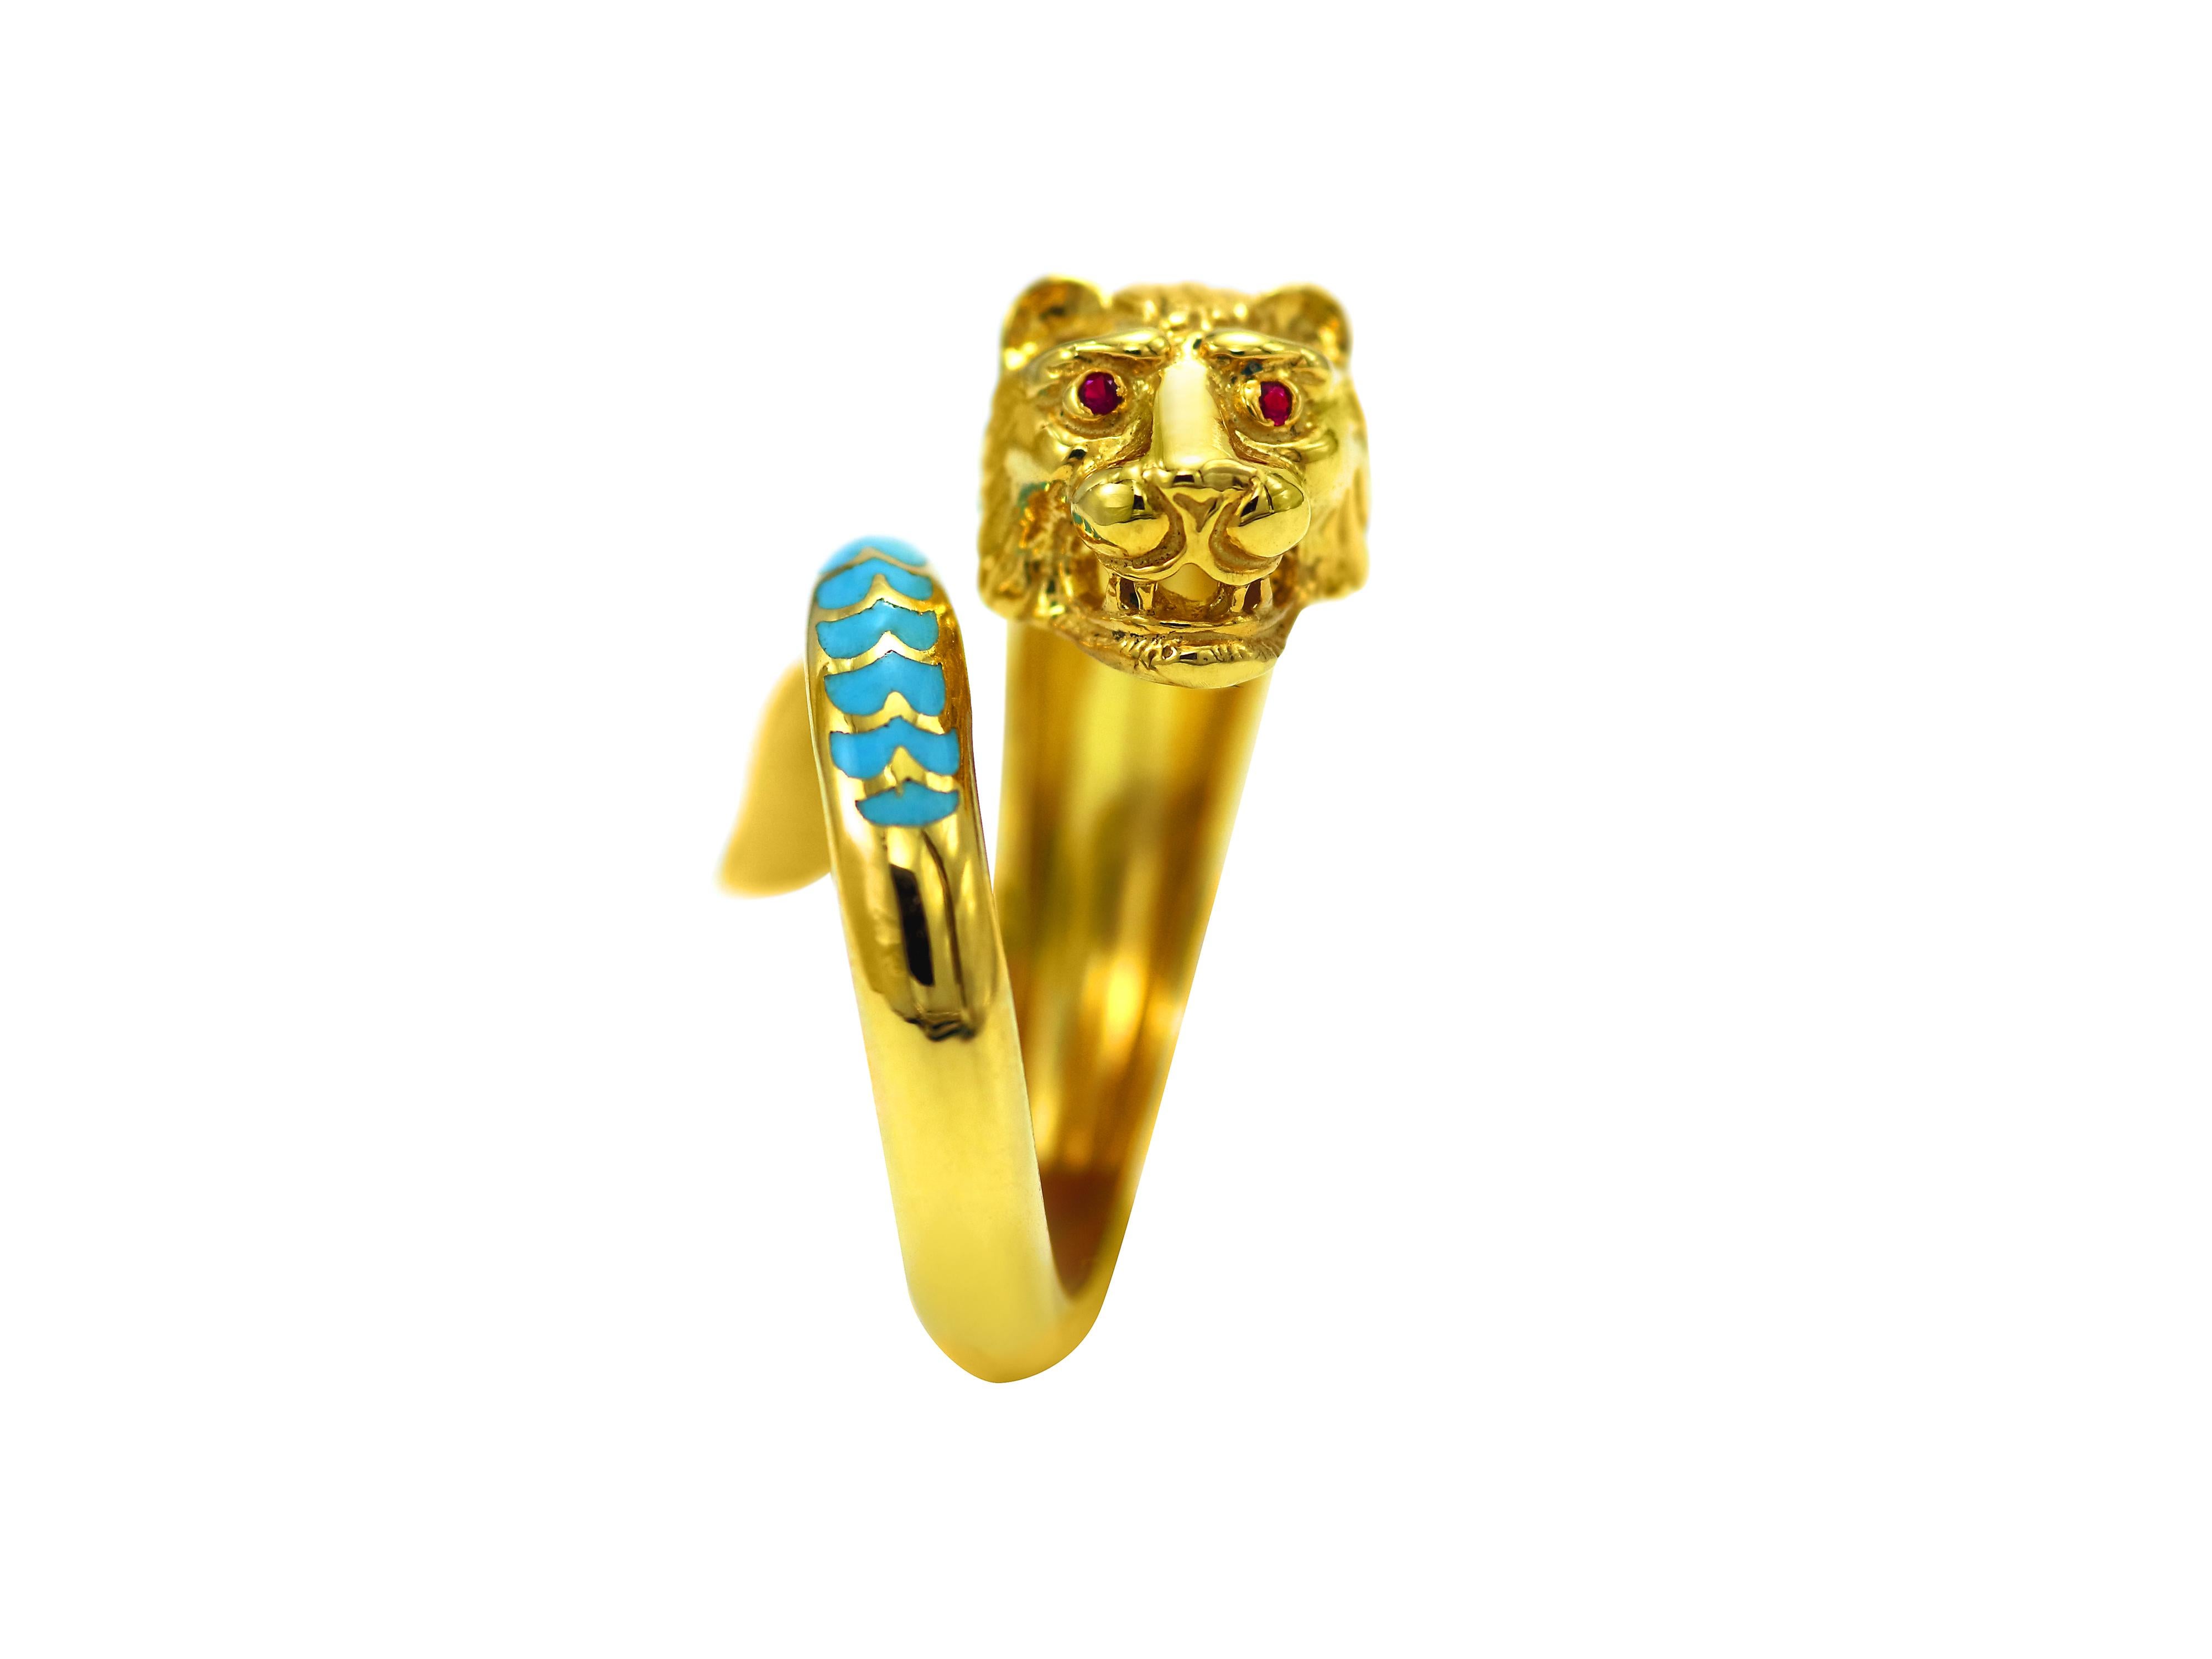 Dimos 18k Gold Lion Ring with Rubies and Diamonds For Sale 1